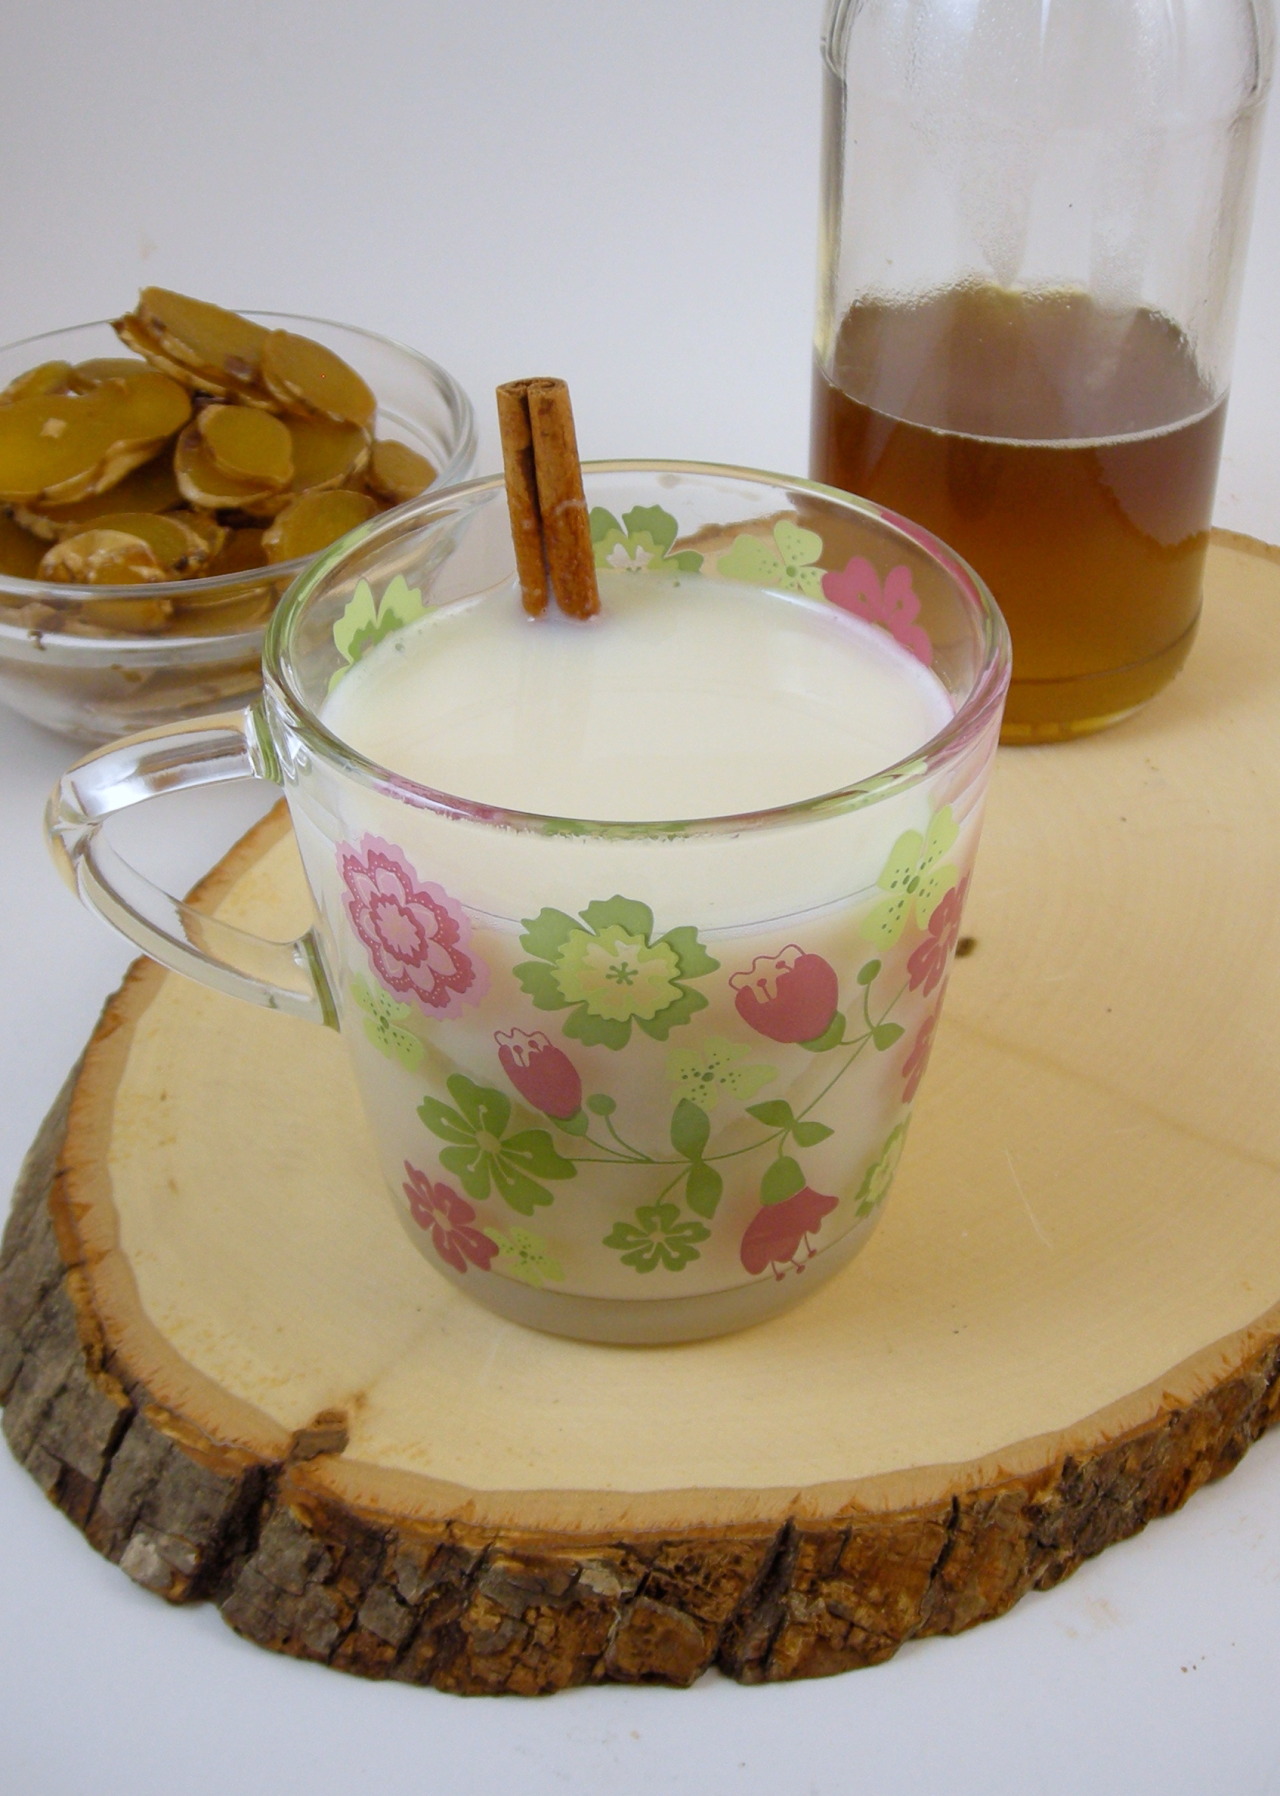 Recipe: Ginger Tea Latte
Fresh ginger smells wonderful, like lemons, and it’s much stronger tasting than ground ginger. I’ve been adding ground ginger to my drinks (tea, milk) as a digestive aid.
The latte was delicious, though a little too sweet. I...